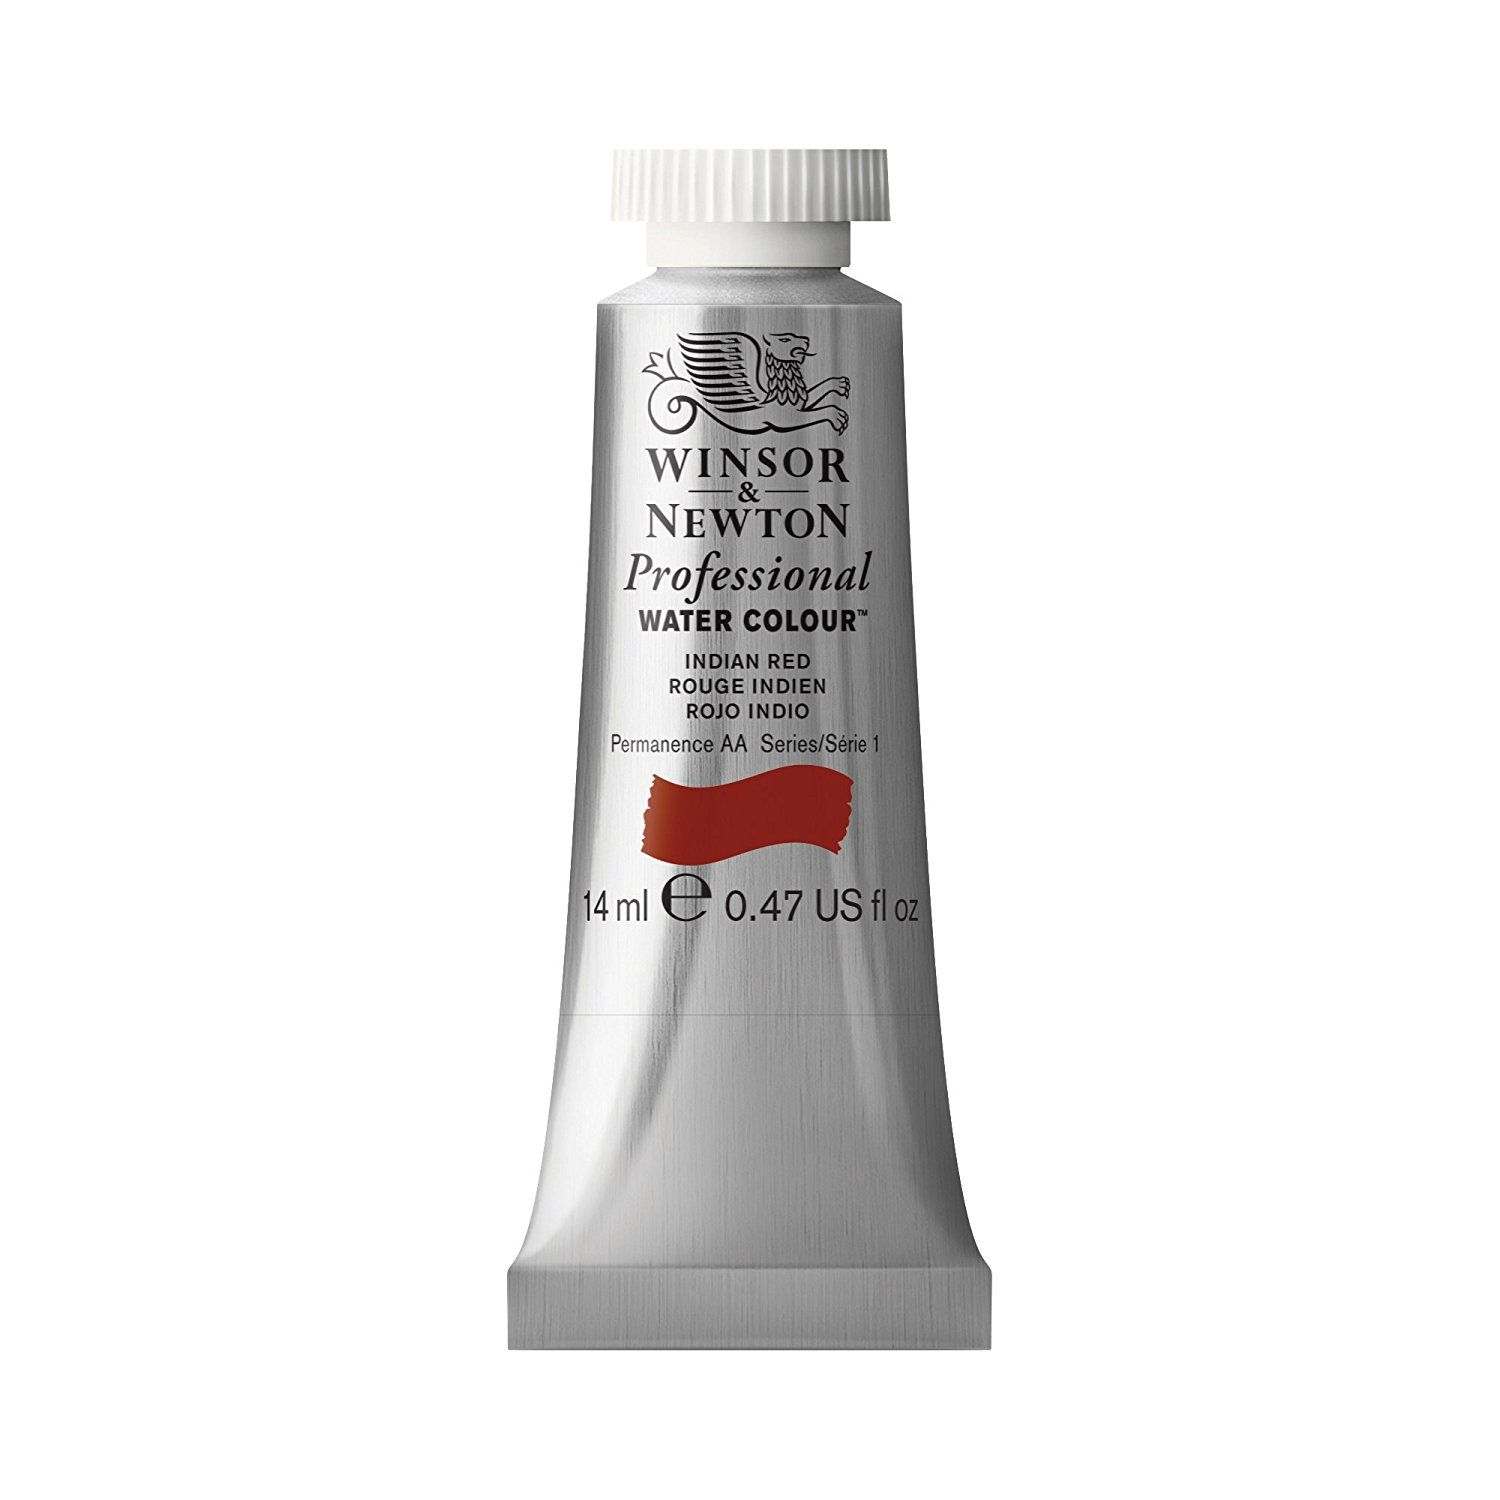 Winsor & Newton Watercolour Paint - Indian Red 14ml